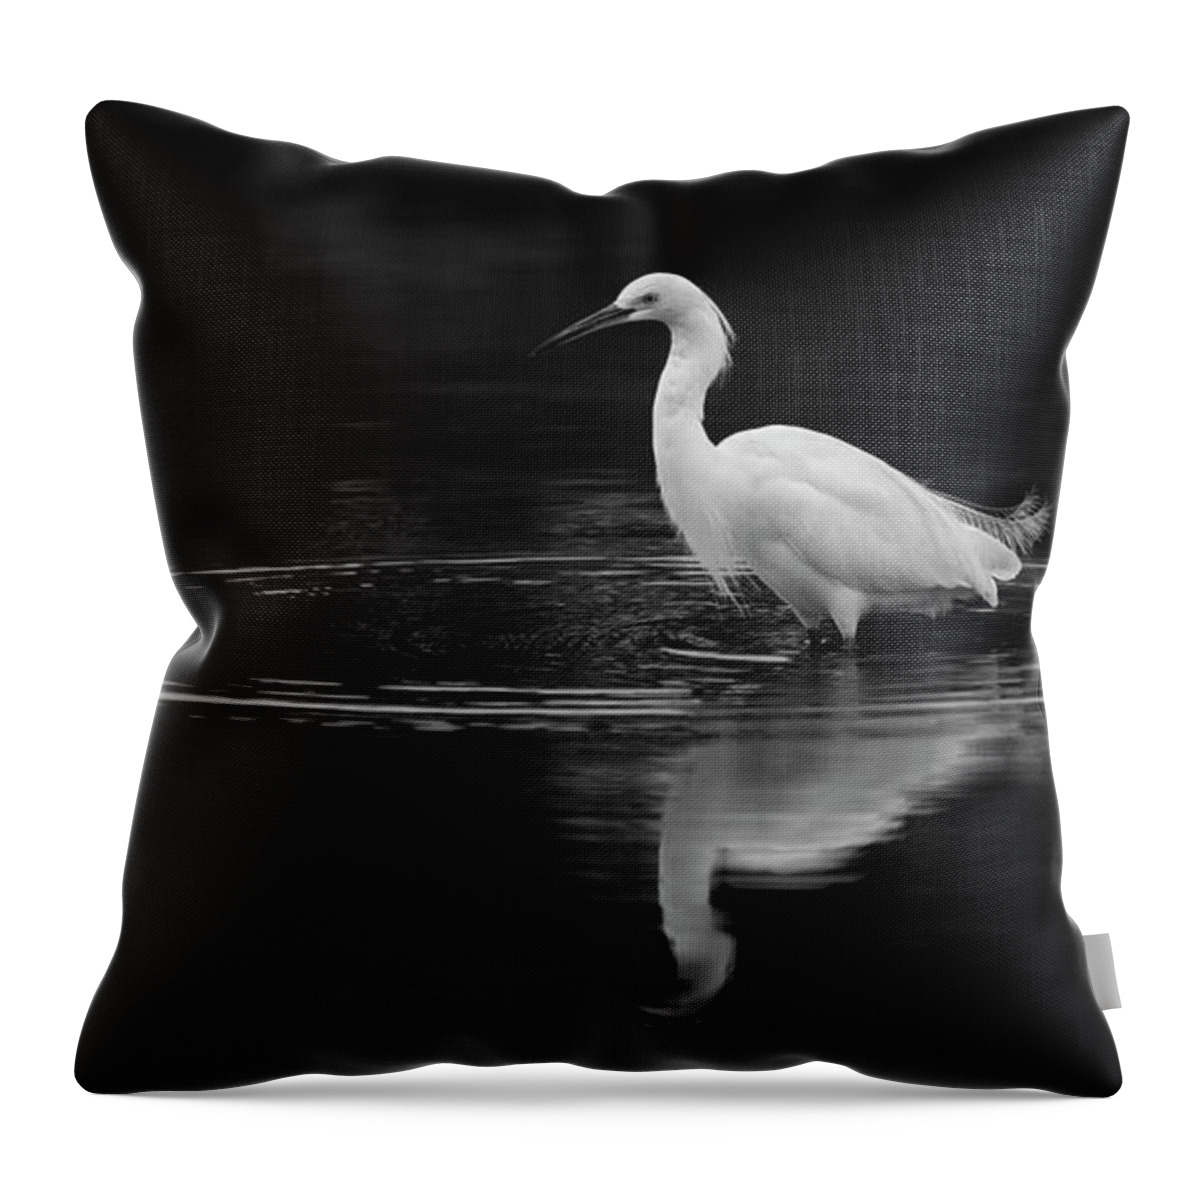 San Diego Throw Pillow featuring the photograph Mission Bay Snowy Egret by William Dunigan